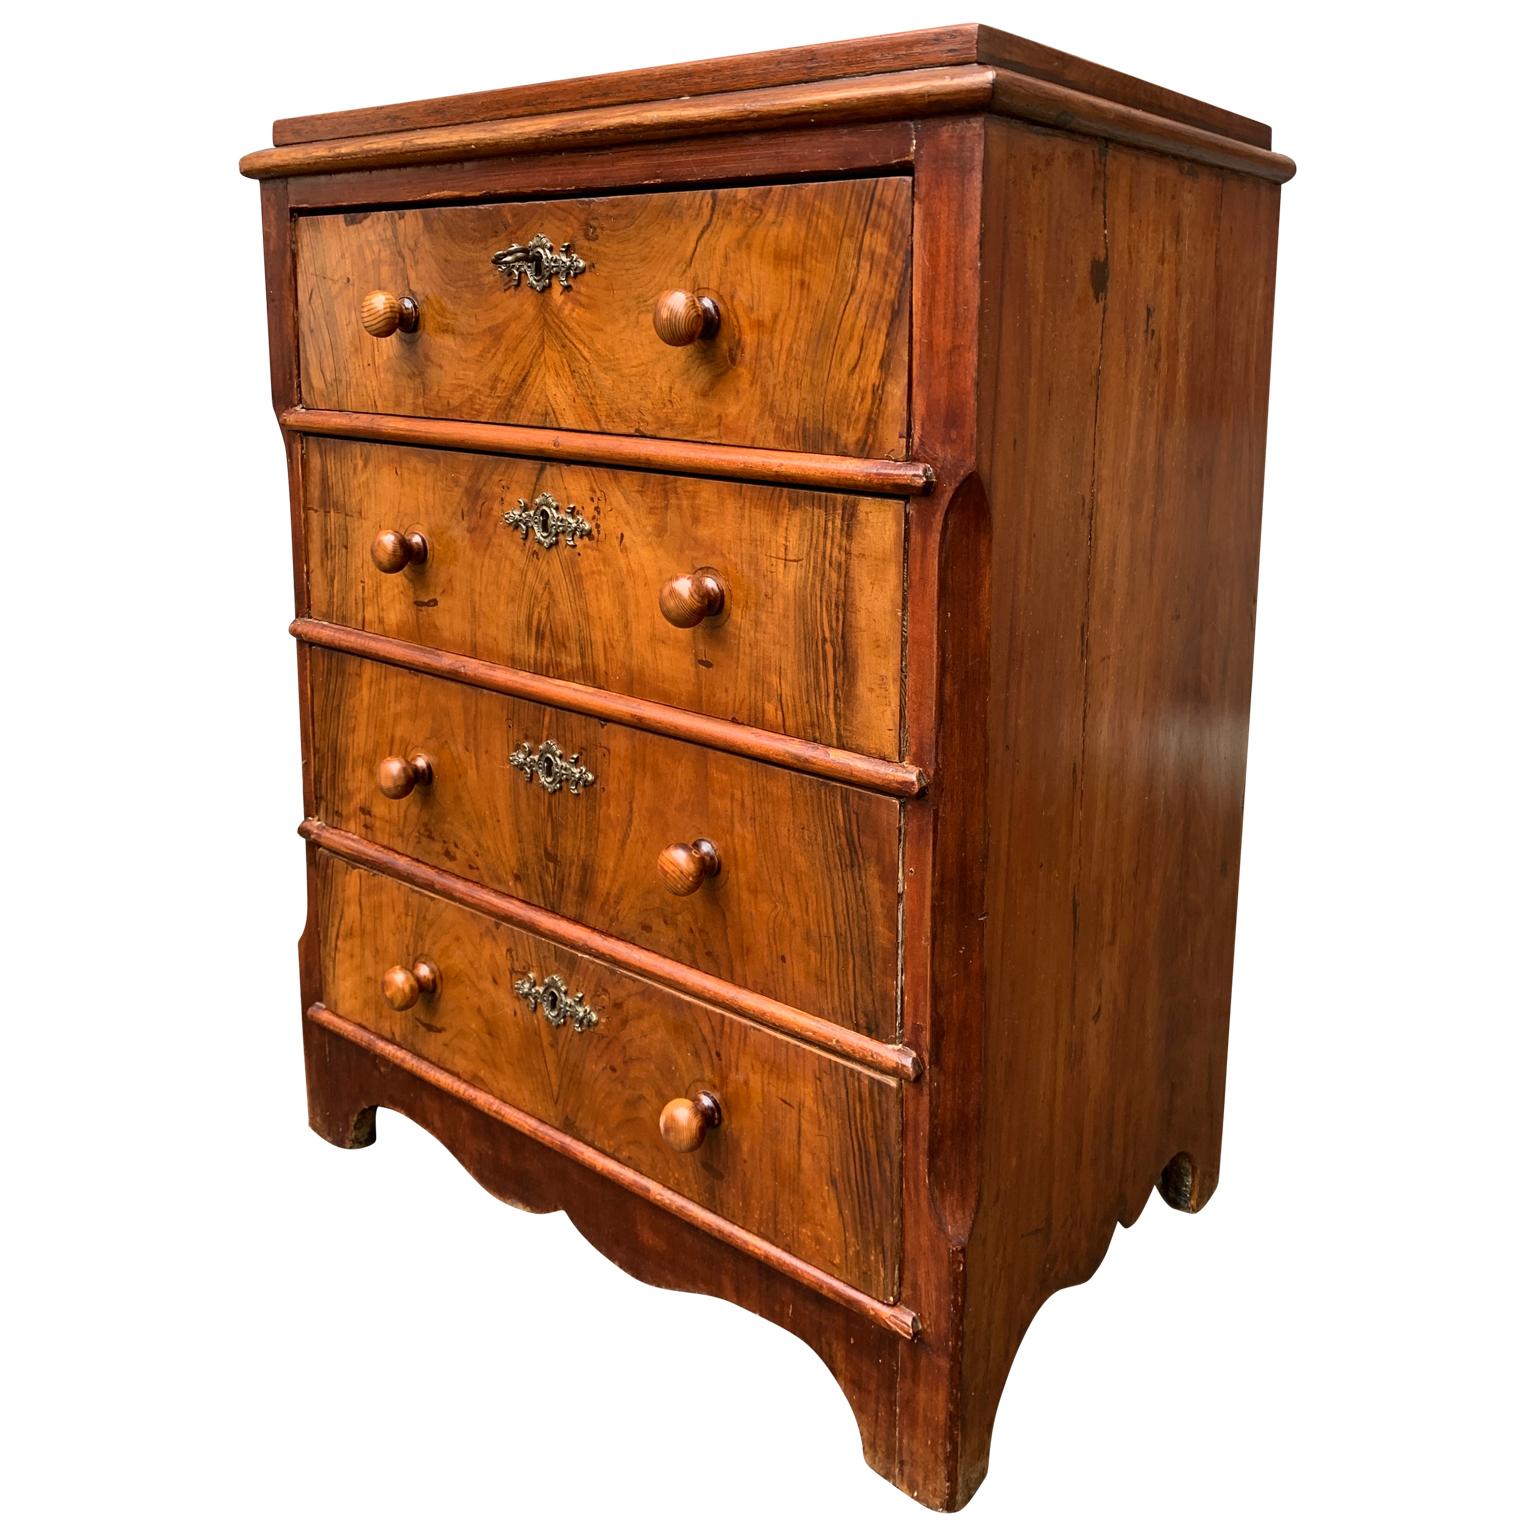 A small 19th century Biedermeier chest of 4 drawers or nightstand from Sweden.